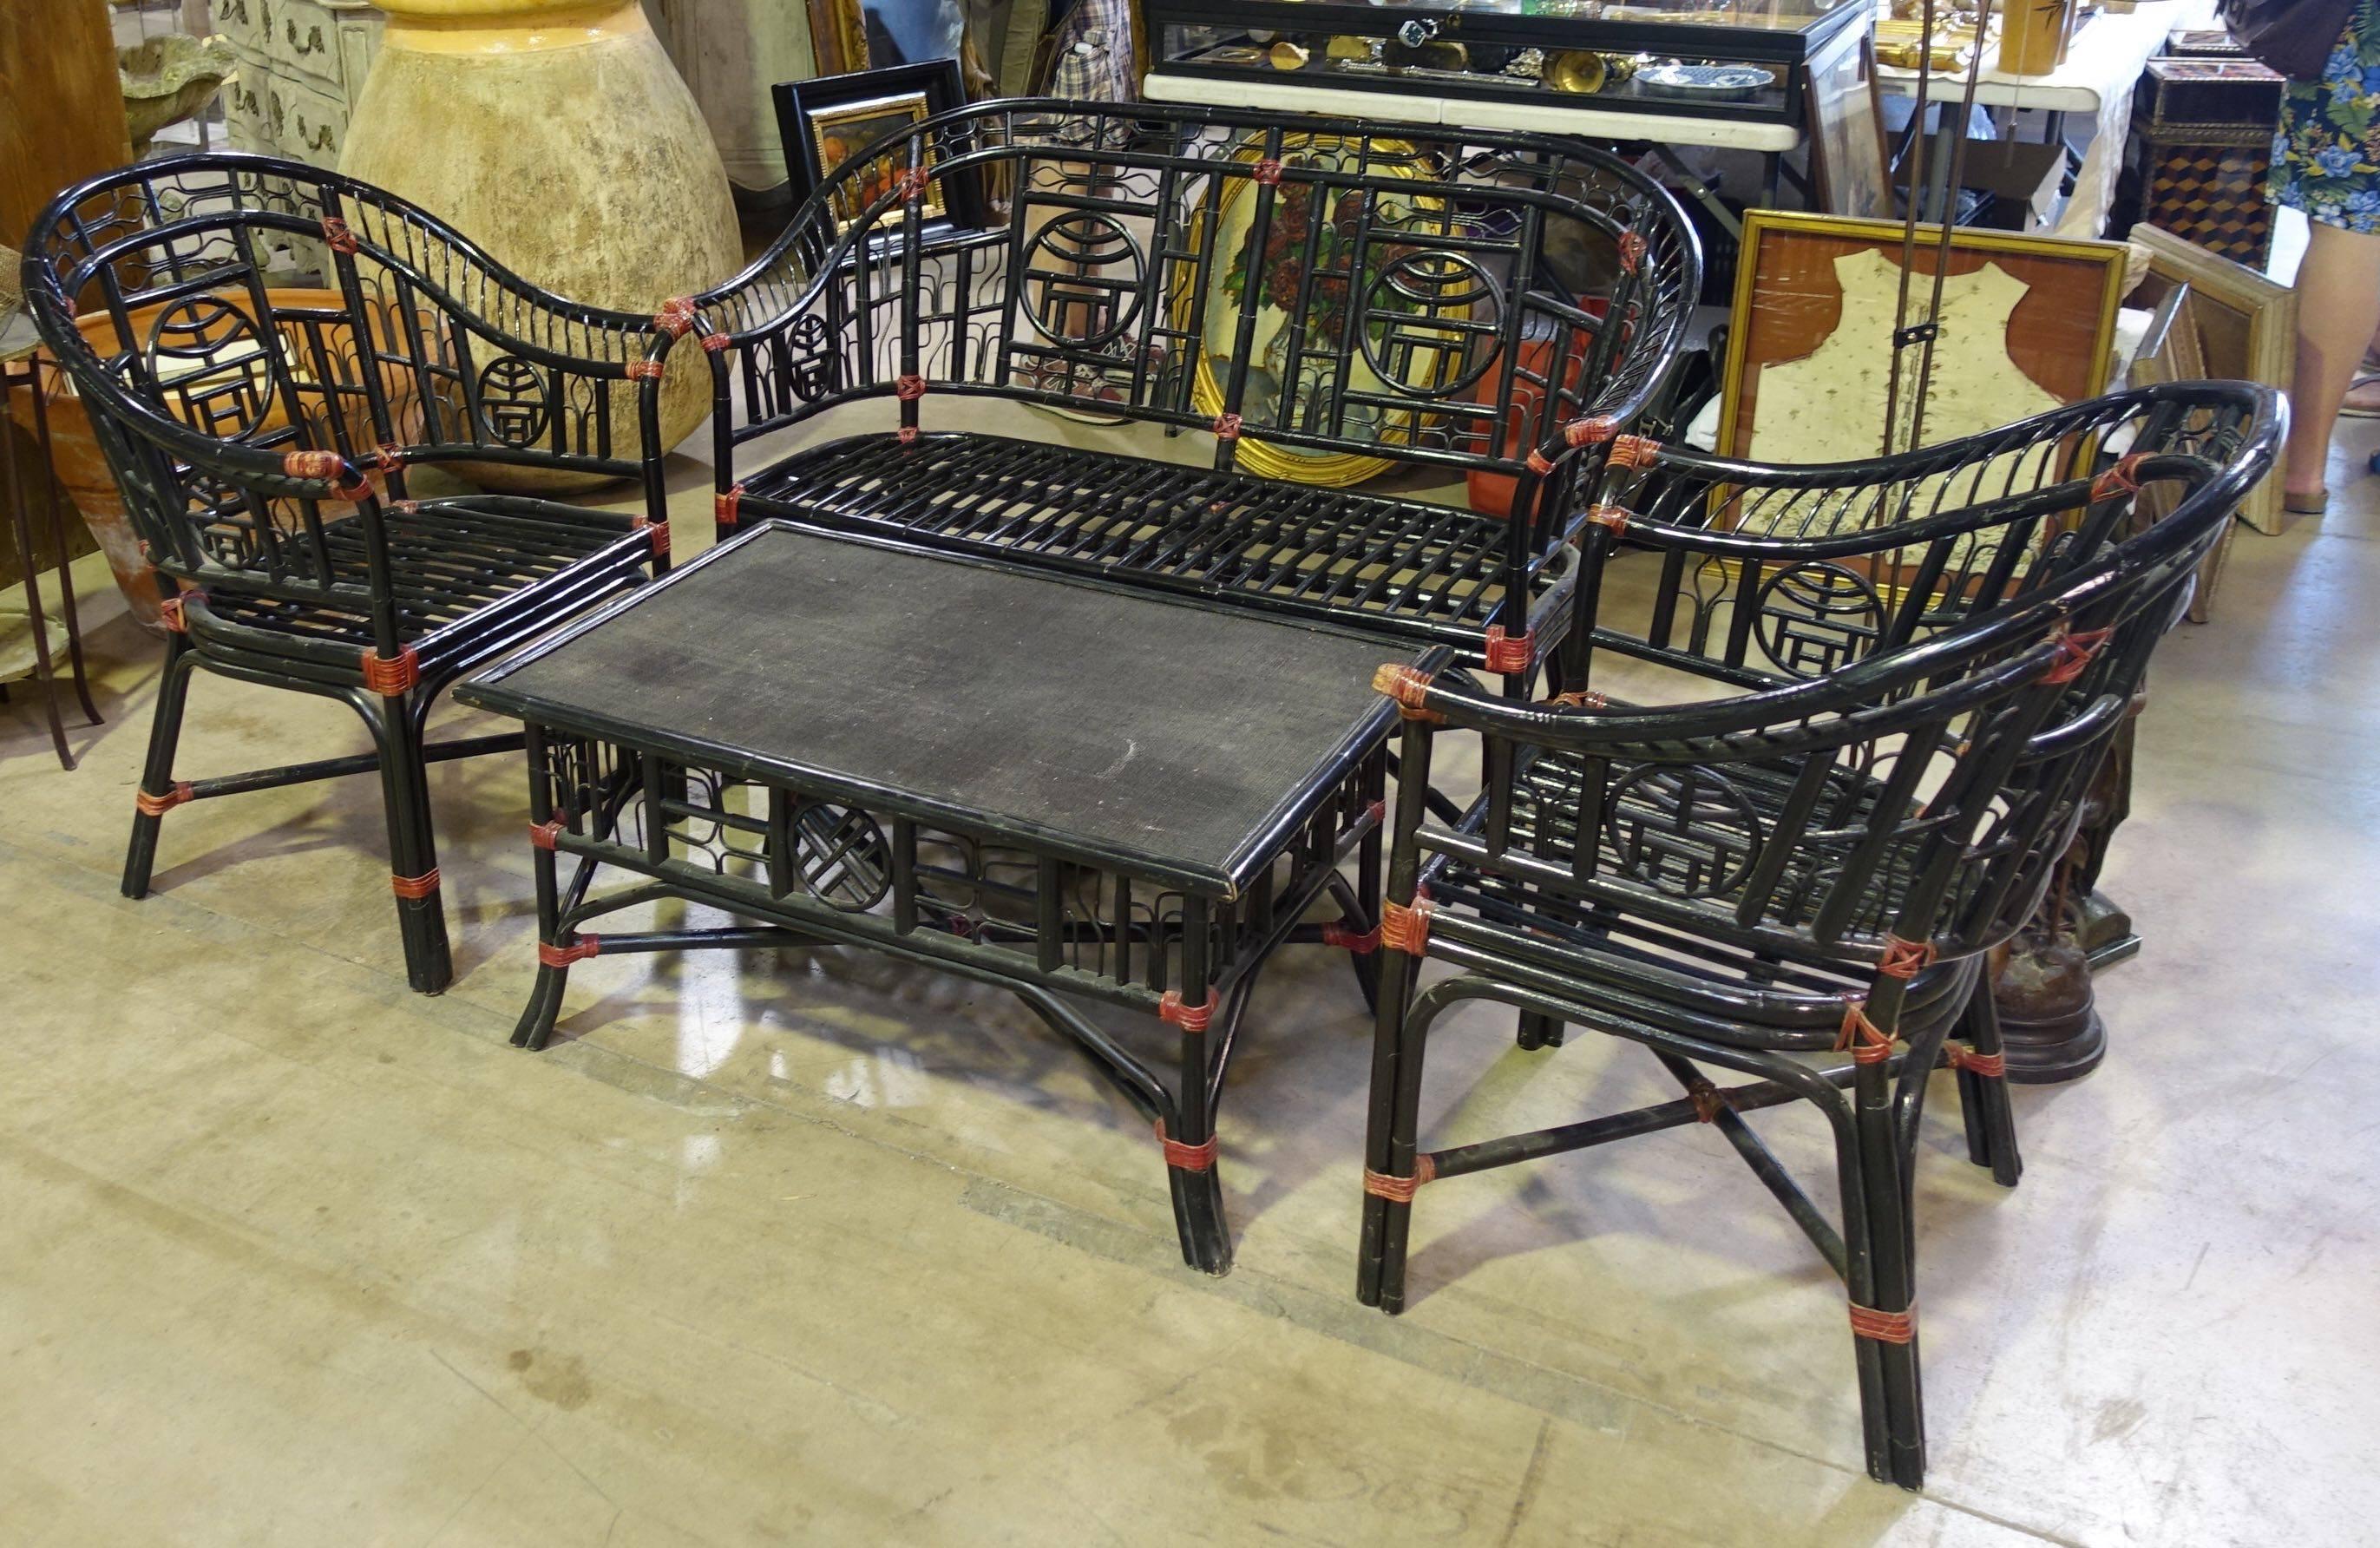 Black bamboo four piece seating group, circa 1960. Red accents. Asian motif.
Perfect for a garden or sun room. Indoor or outdoor patio.
Sofa measures 50 W x 25 deep x 35 BH x 20 SH. The chairs measure 28 W x 25 deep x 35 BH x 20 SH. The coffee table